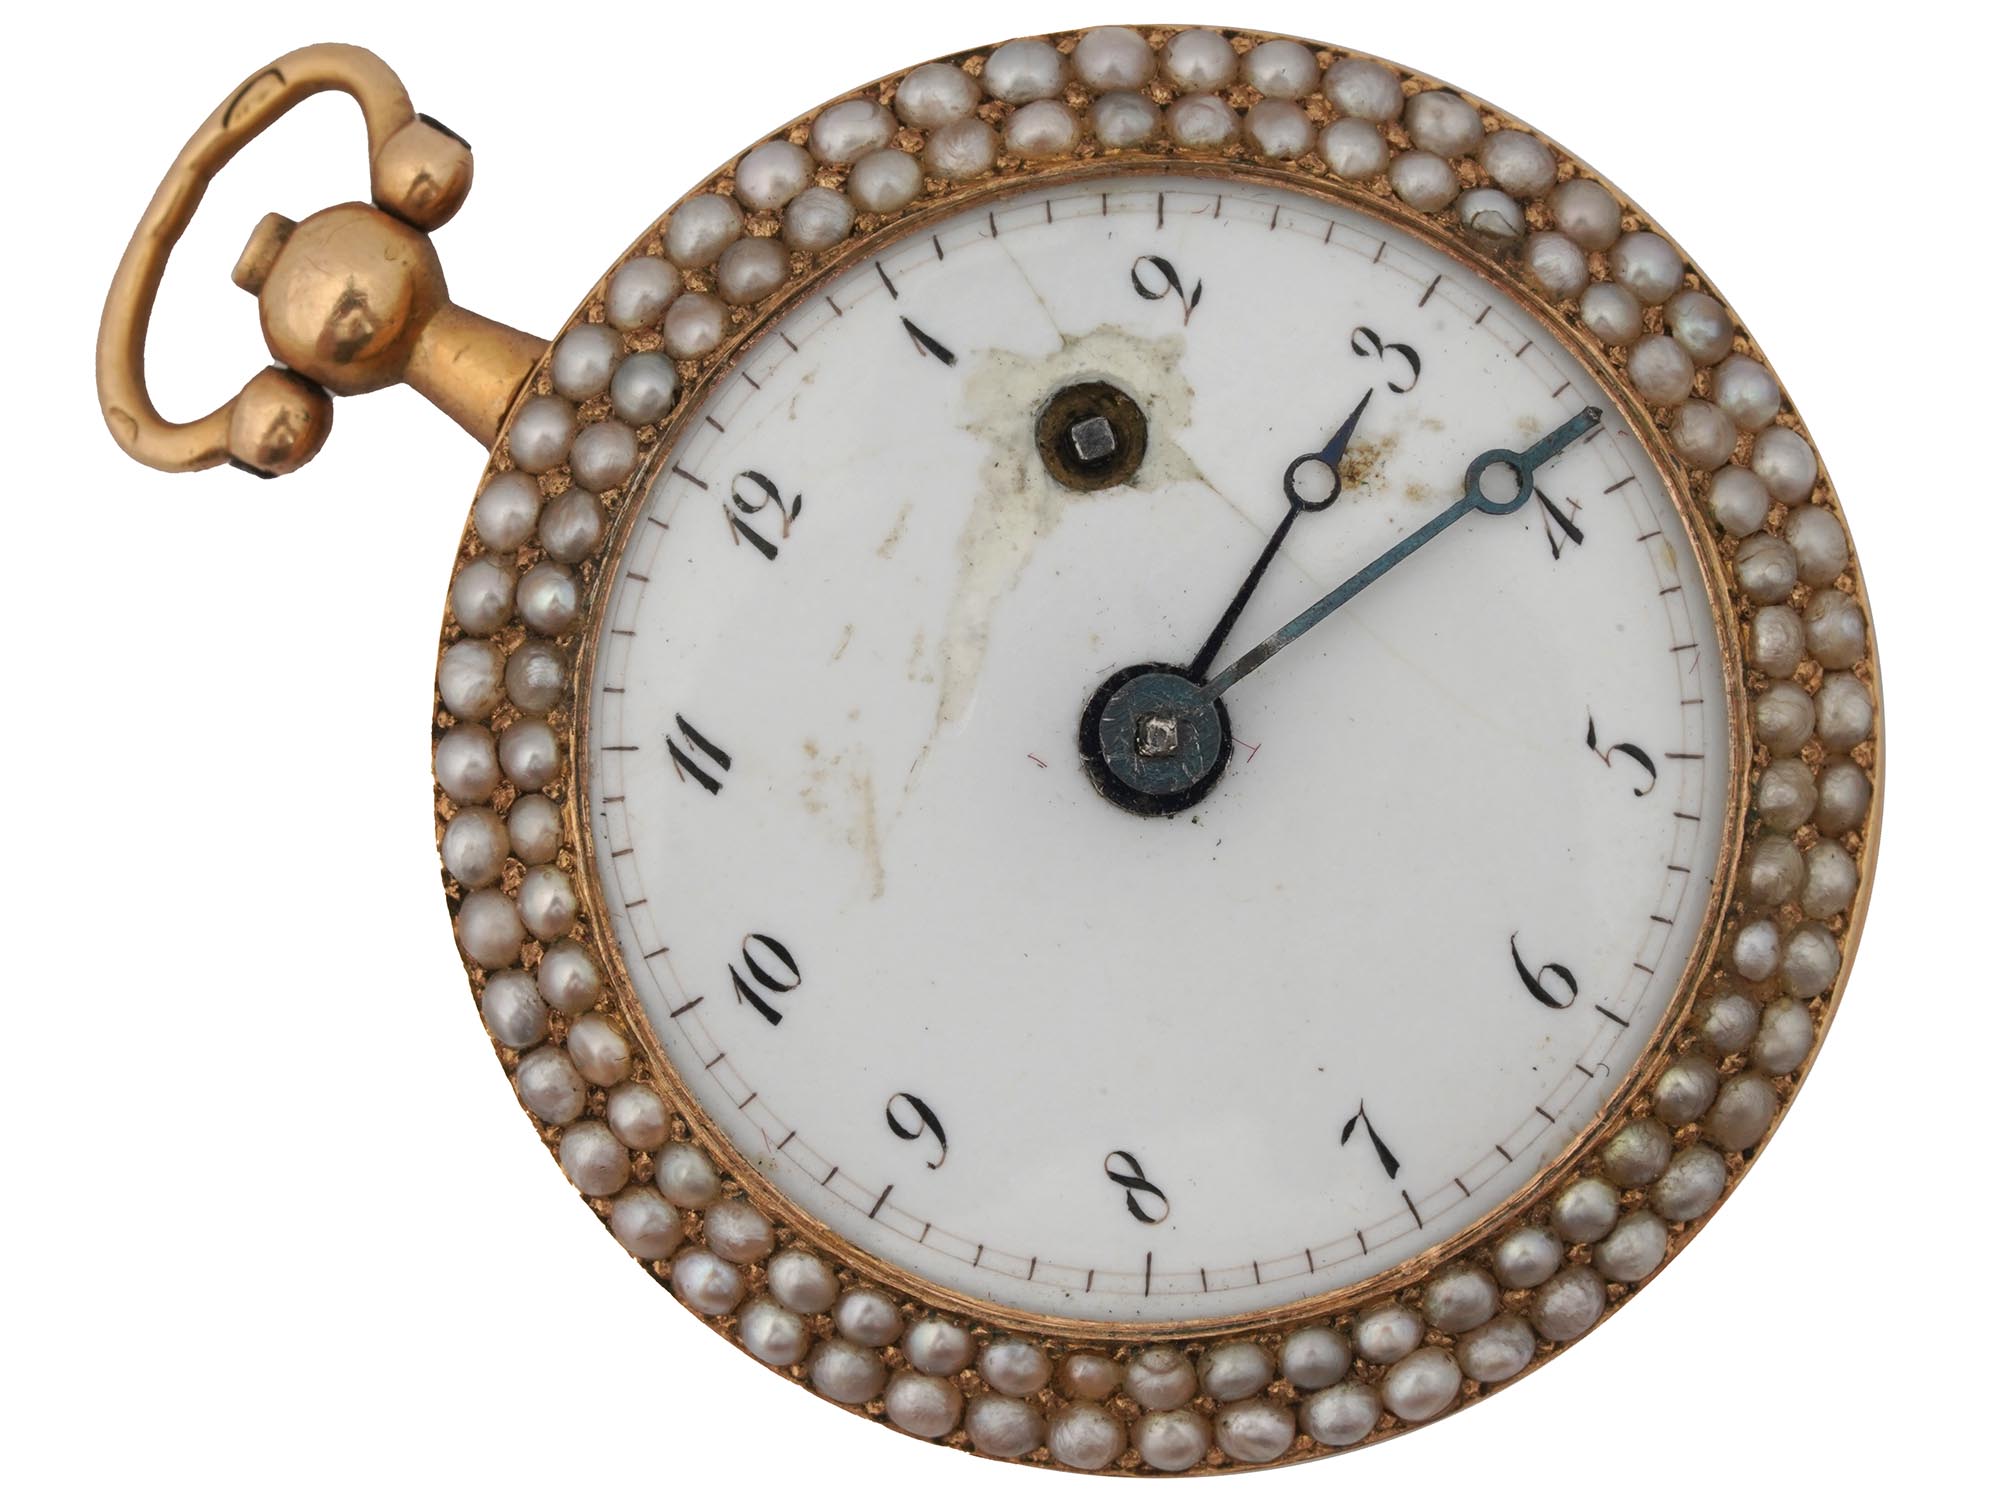 VINTAGE SOLID GOLD PEARLS JEWELRY POCKET WATCH PIC-0